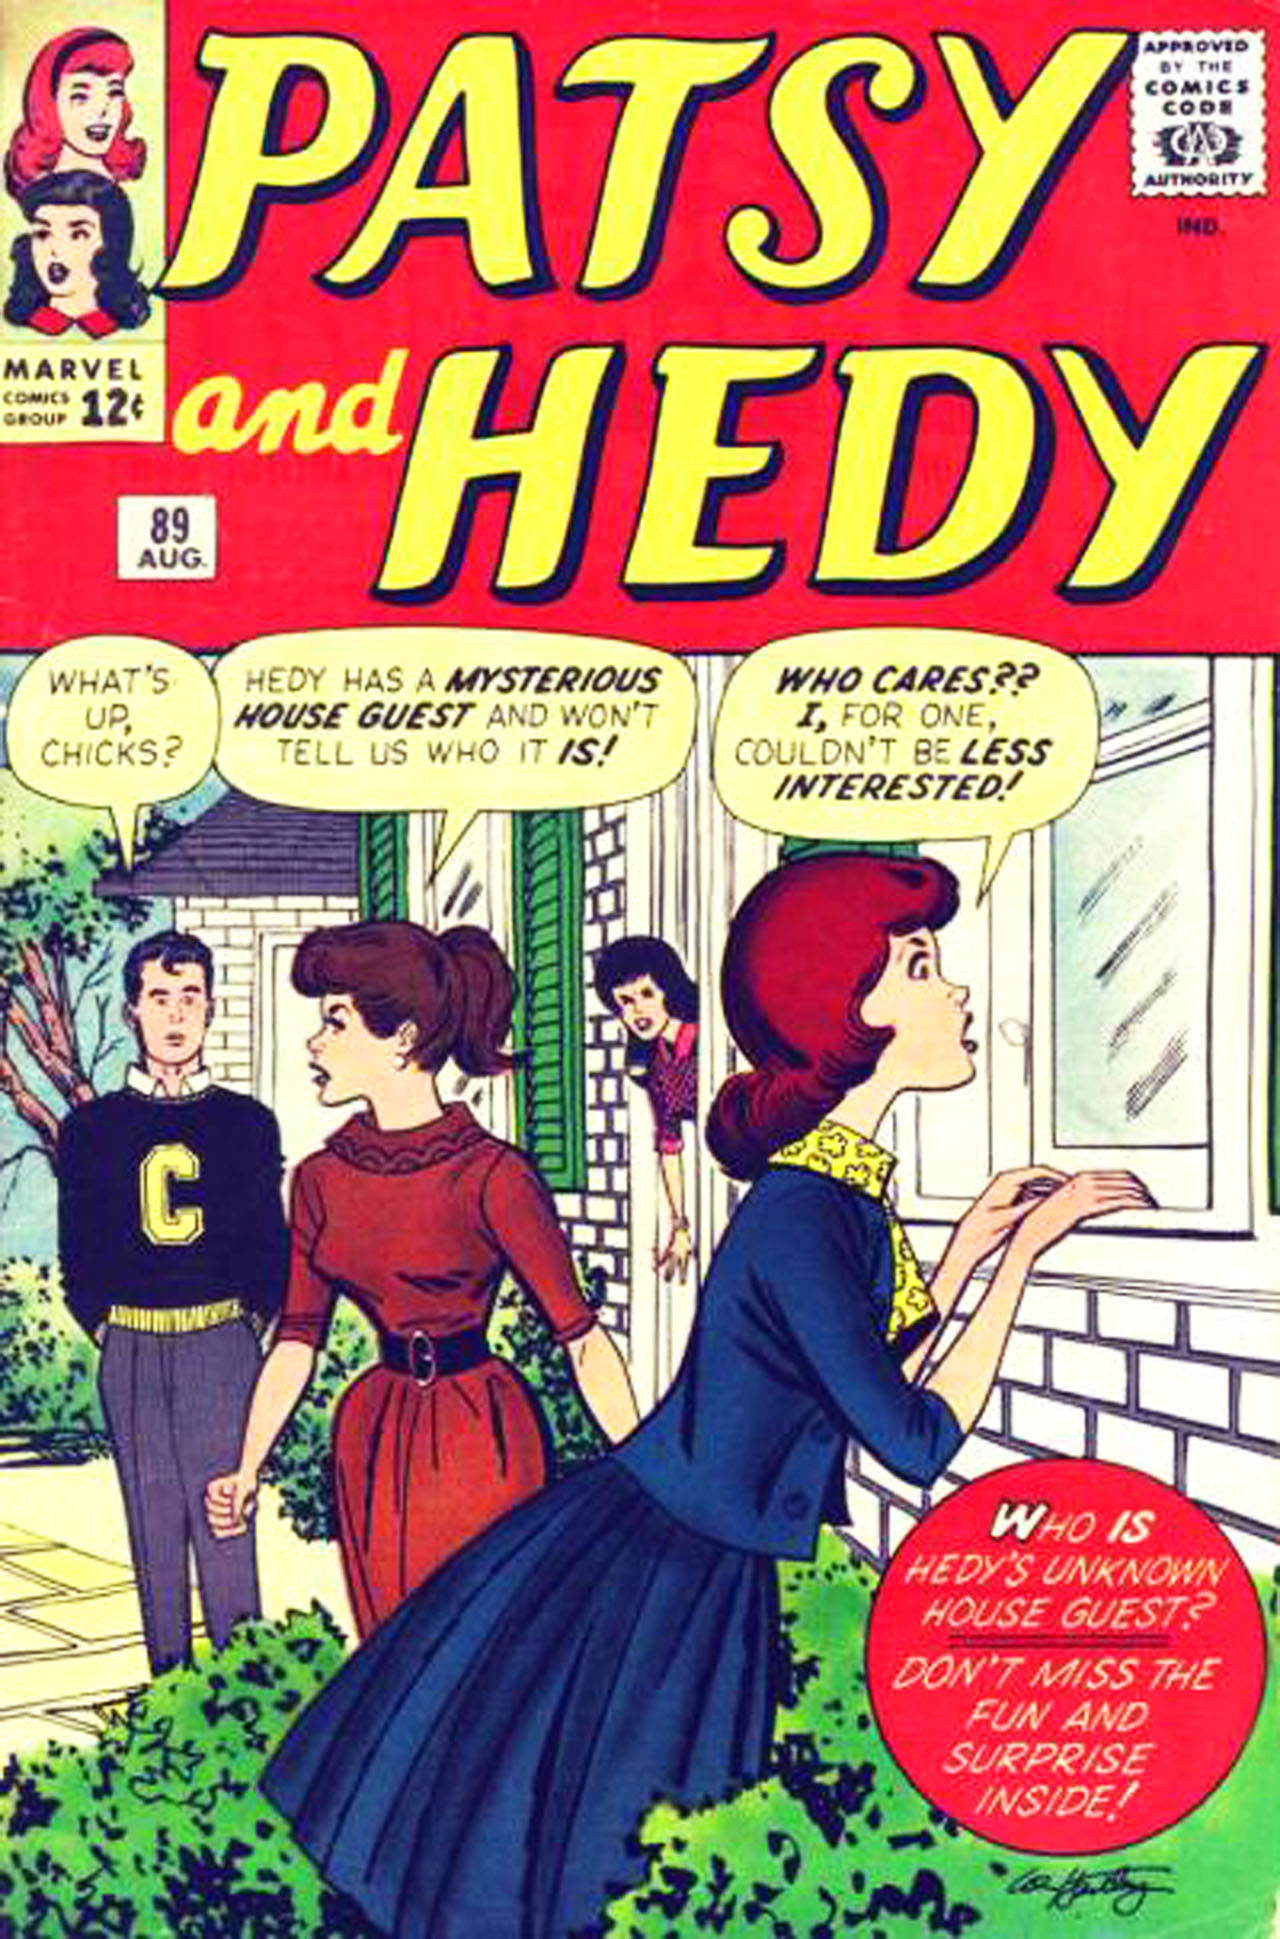 Read online Patsy and Hedy comic -  Issue #89 - 1